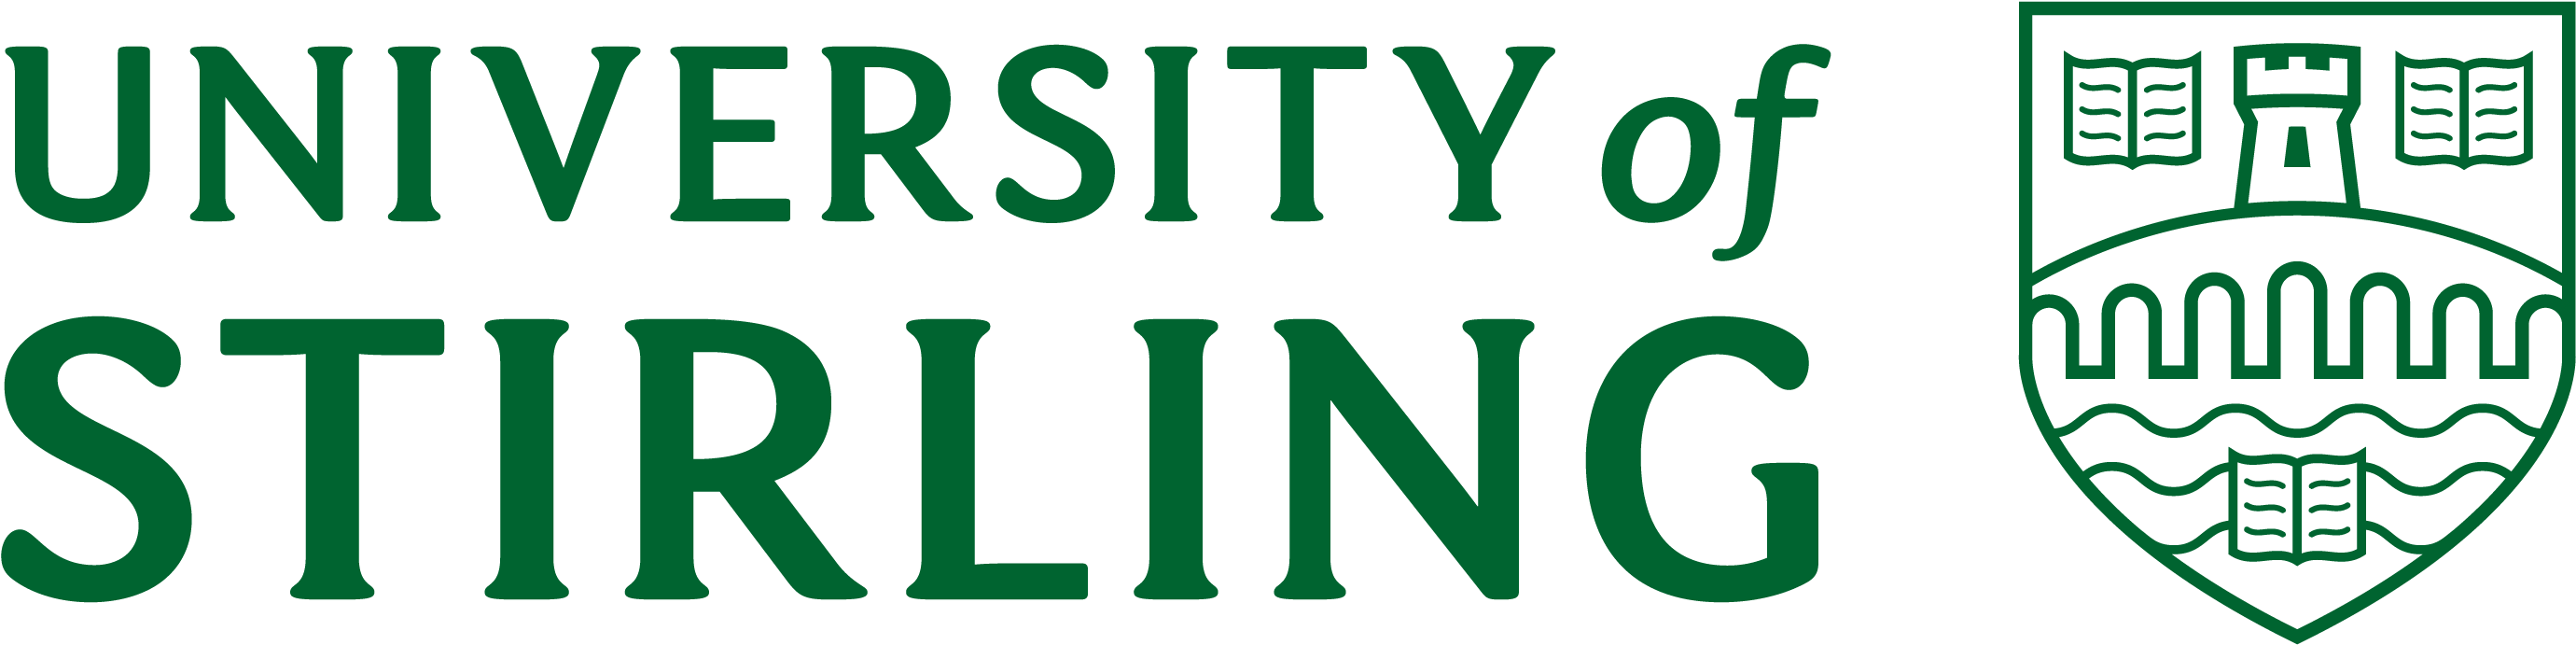 Download University Of Stirling Logo Png Image With No Background Pngkey Com